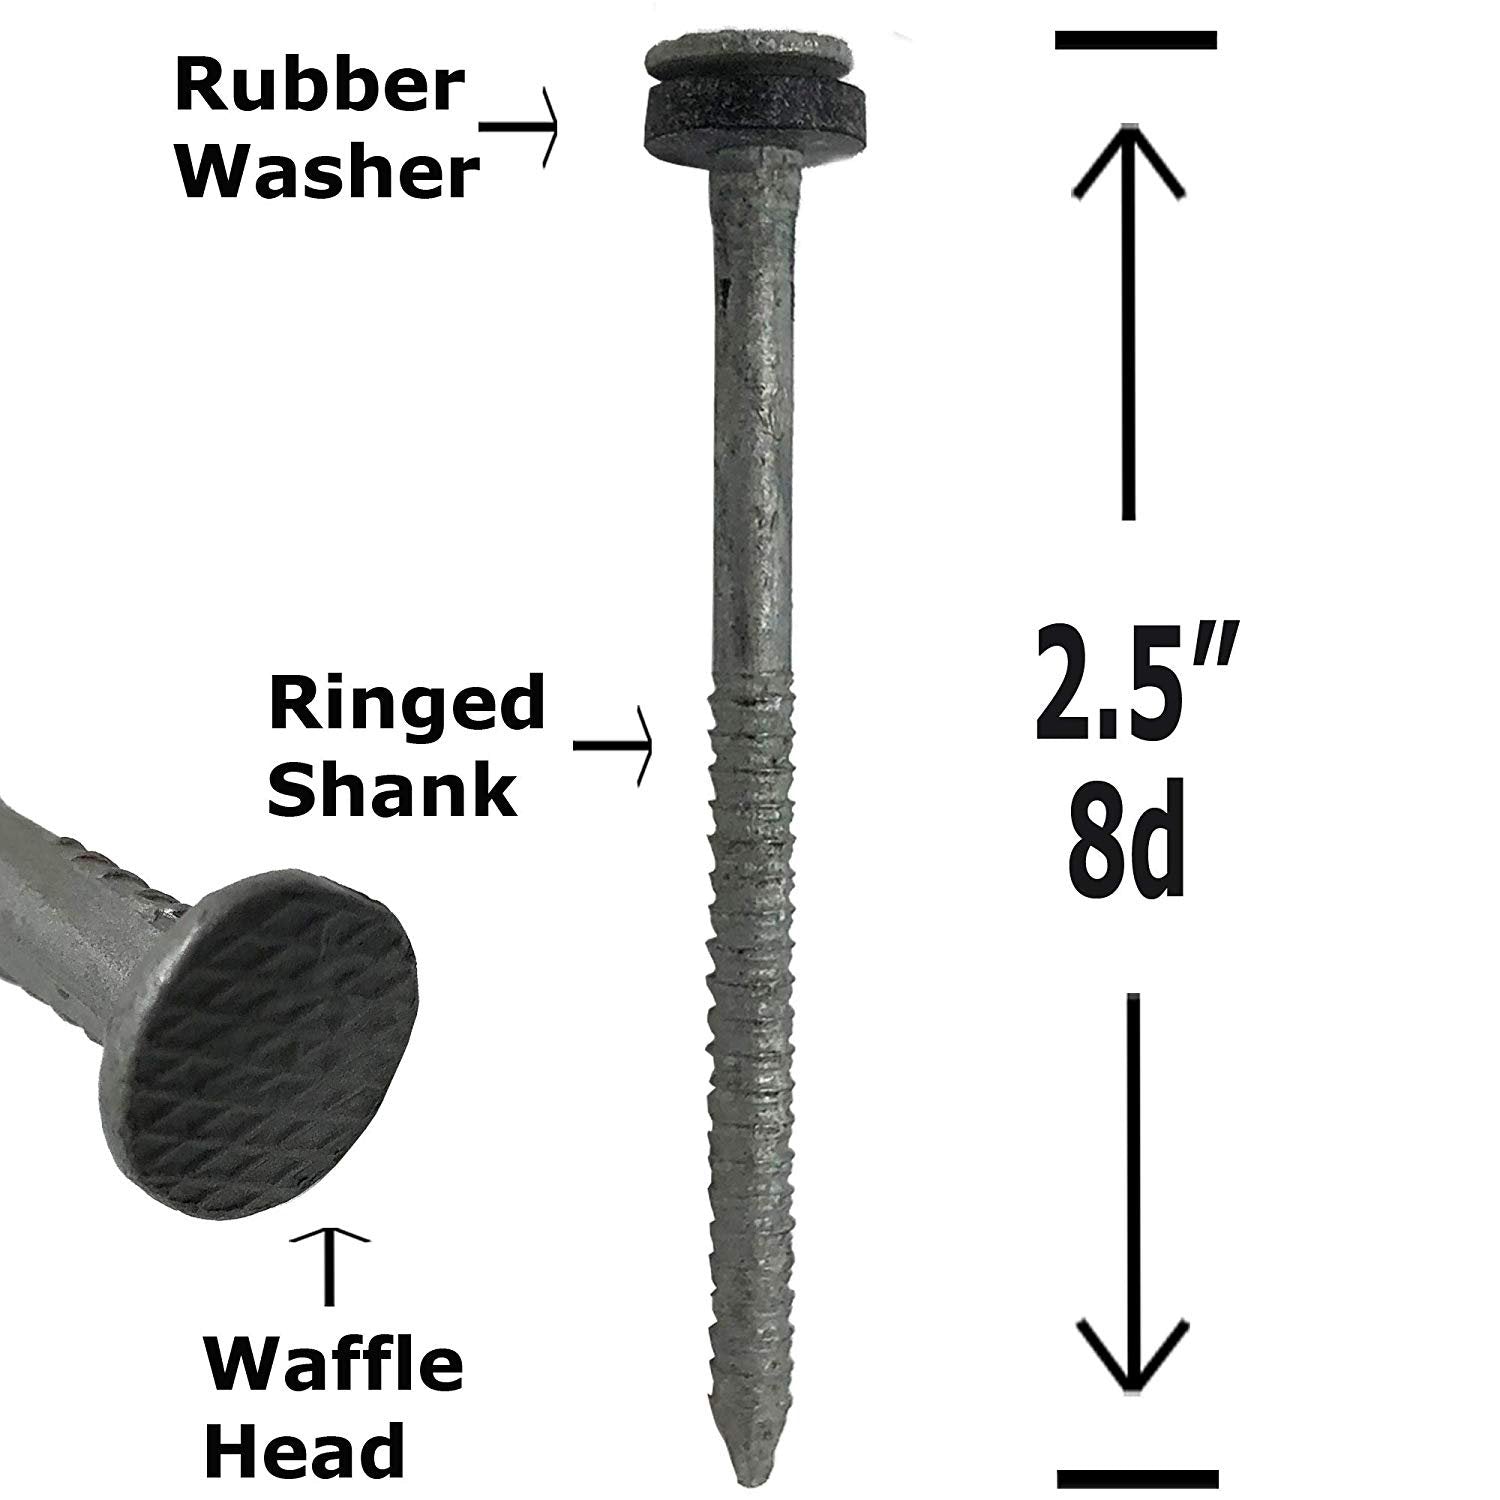 Robertson vs Phillips headed screws - Page 4 - Cruisers & Sailing Forums